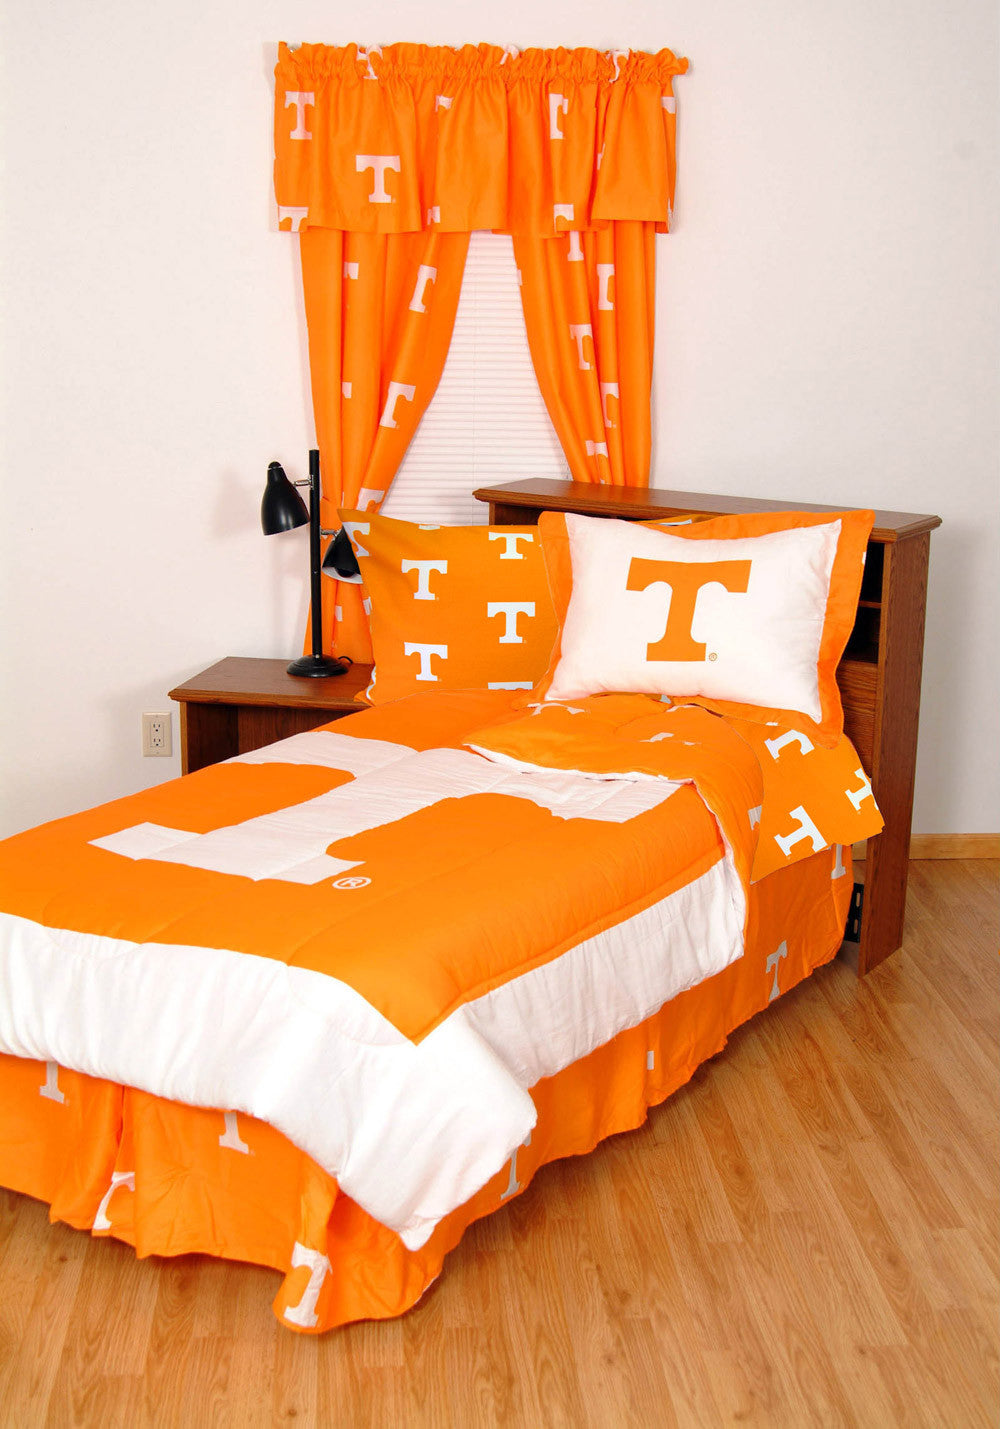 Tennessee Bed In A Bag King - With Team Colored Sheets - Tenbbkg By College Covers